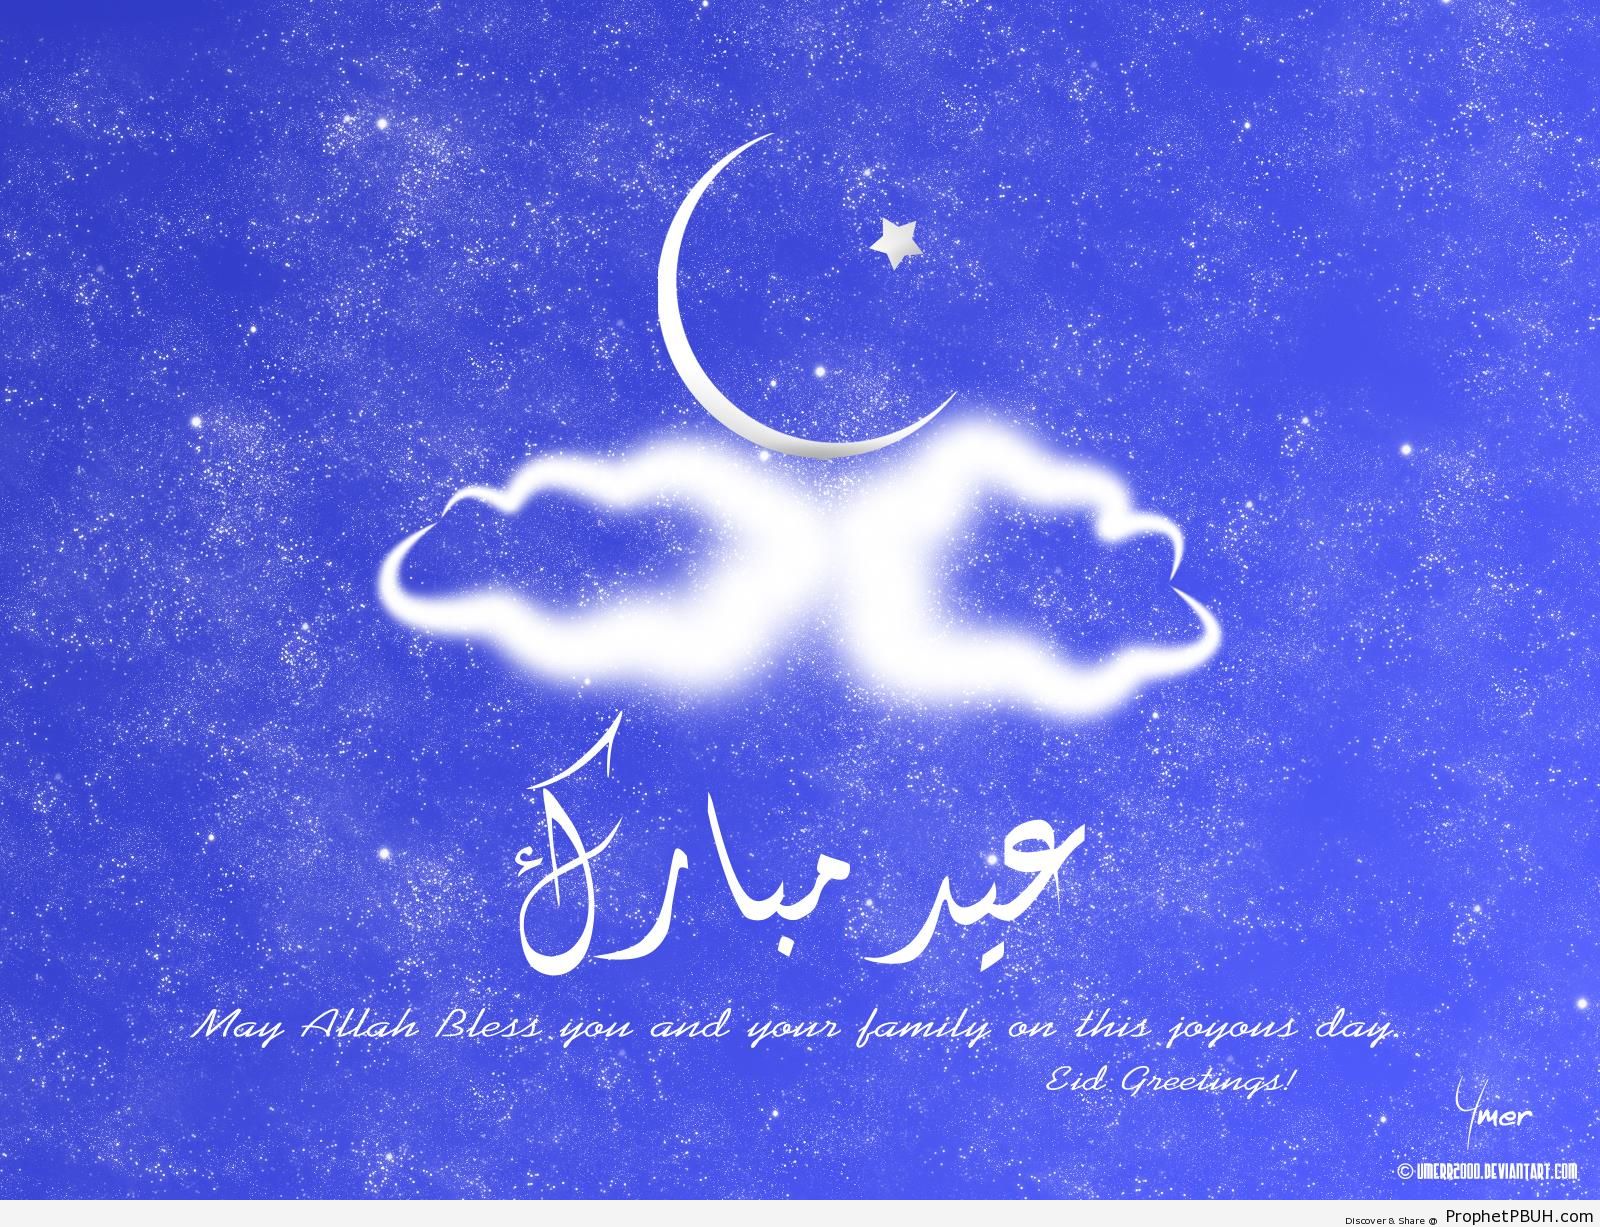 Eid Mubarak Under Crescent and Star on Blue Background - Drawings of Crescent Moons 